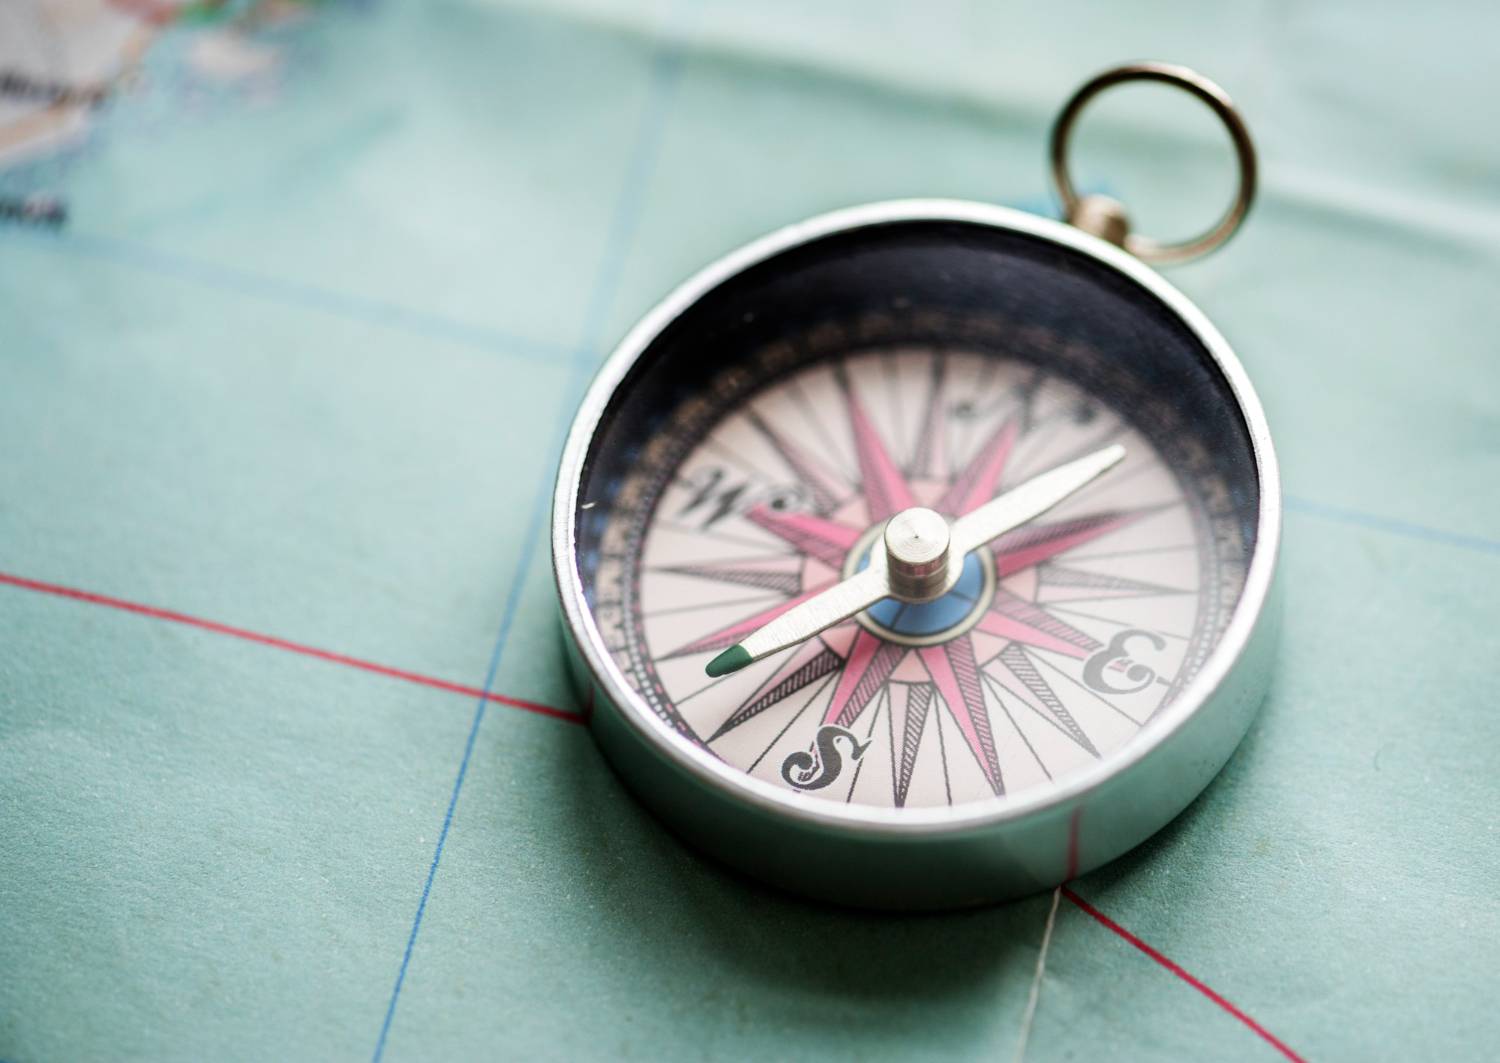 Vintage compass on a map, essential for navigating 11-person pontoon boats.